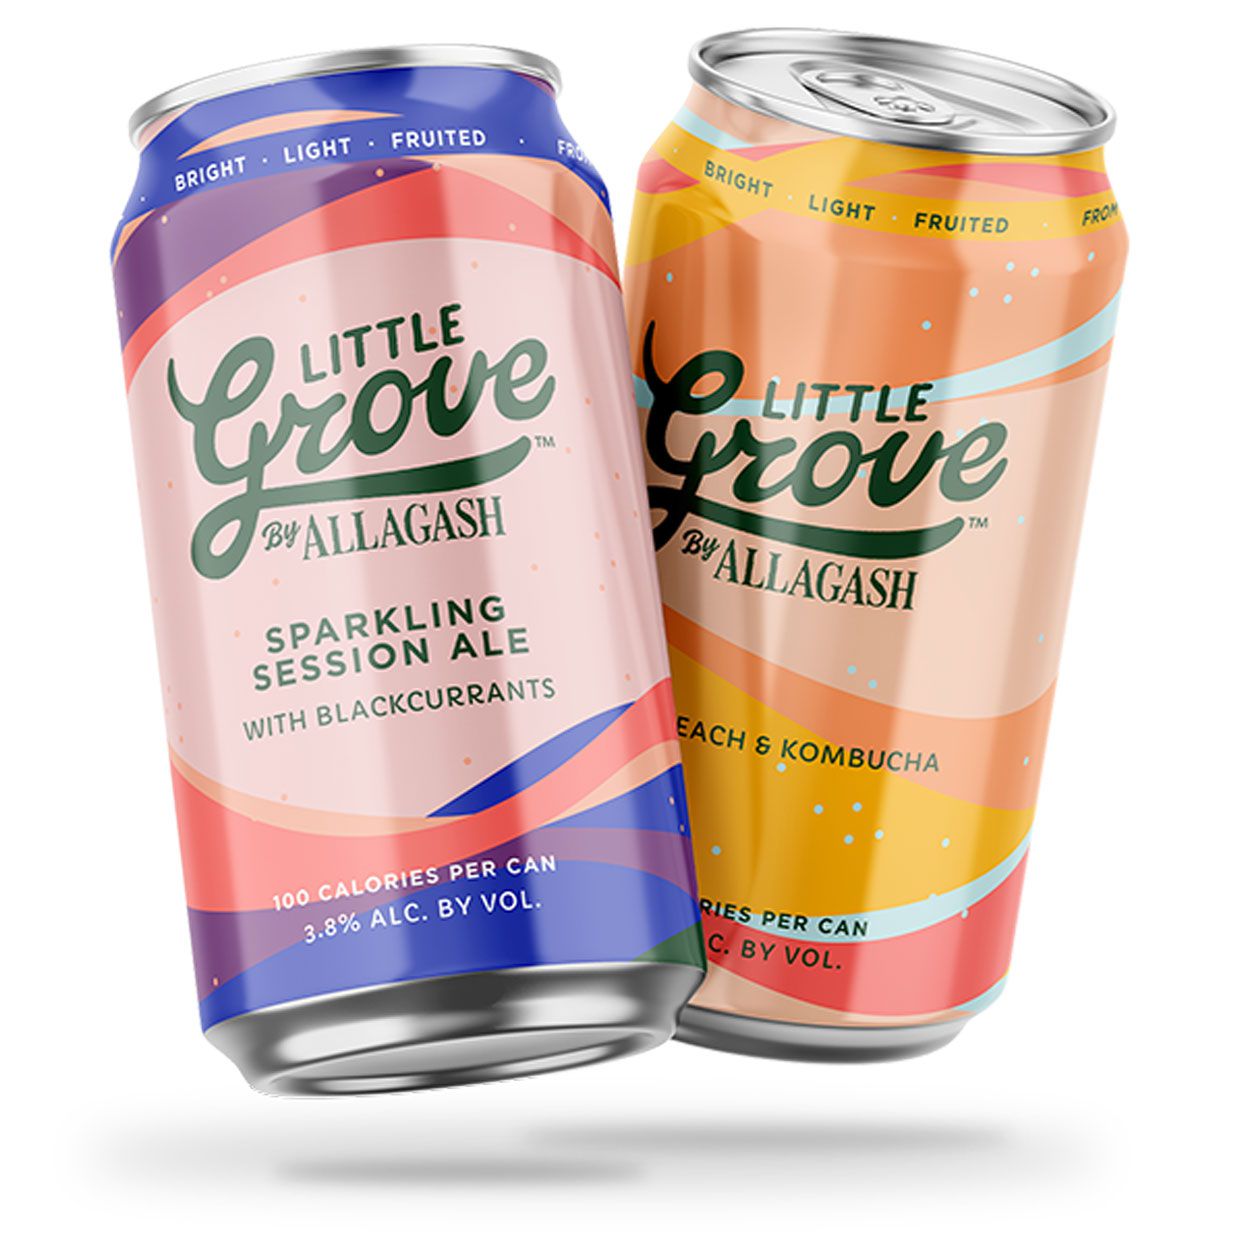 little grove beer cans